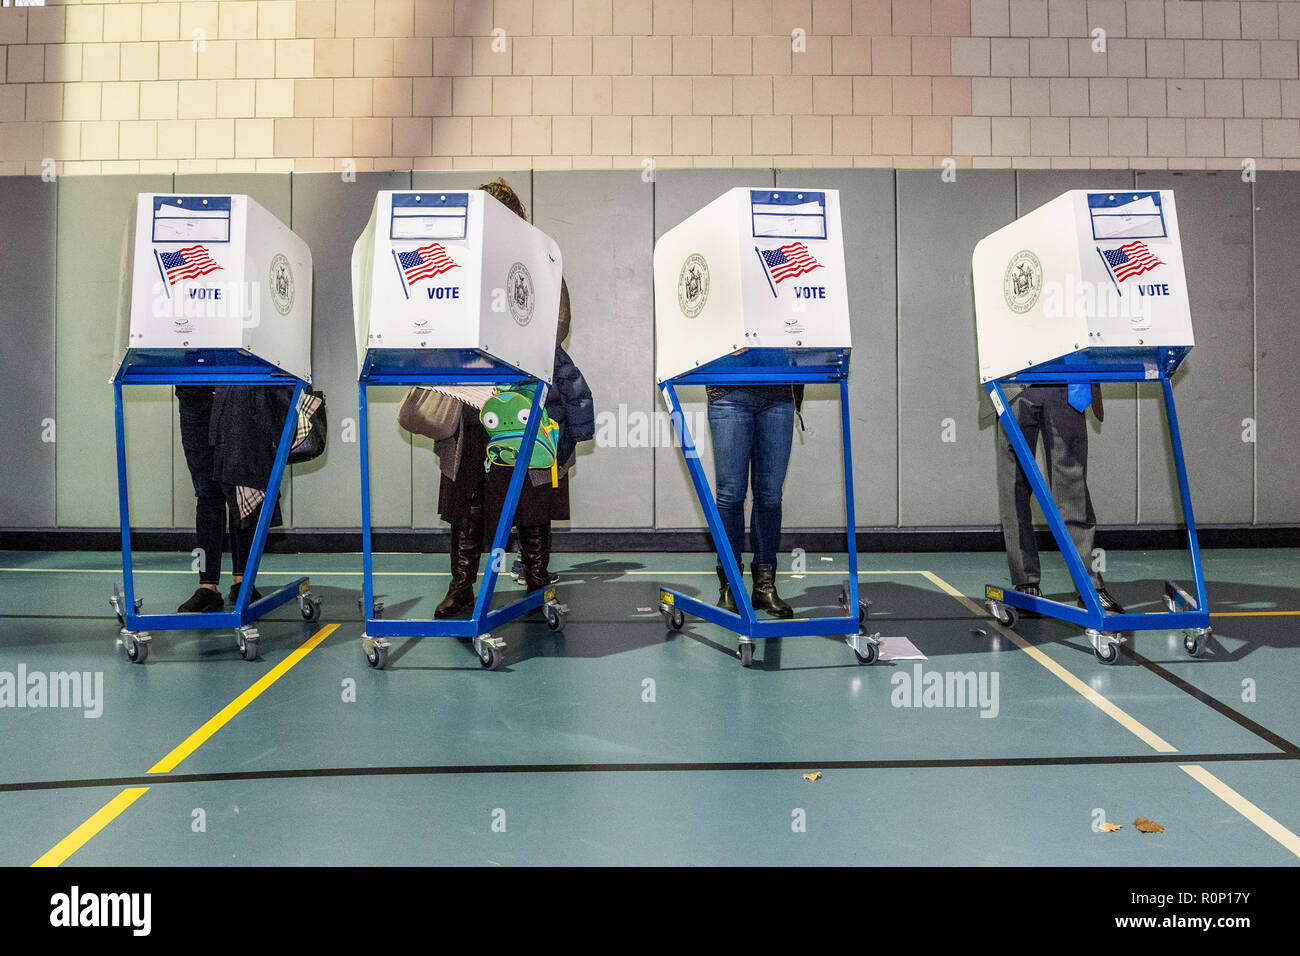 People are seen casting their votes during the elections. Election Day voting on the Upper West Side in New York City. Stock Photo